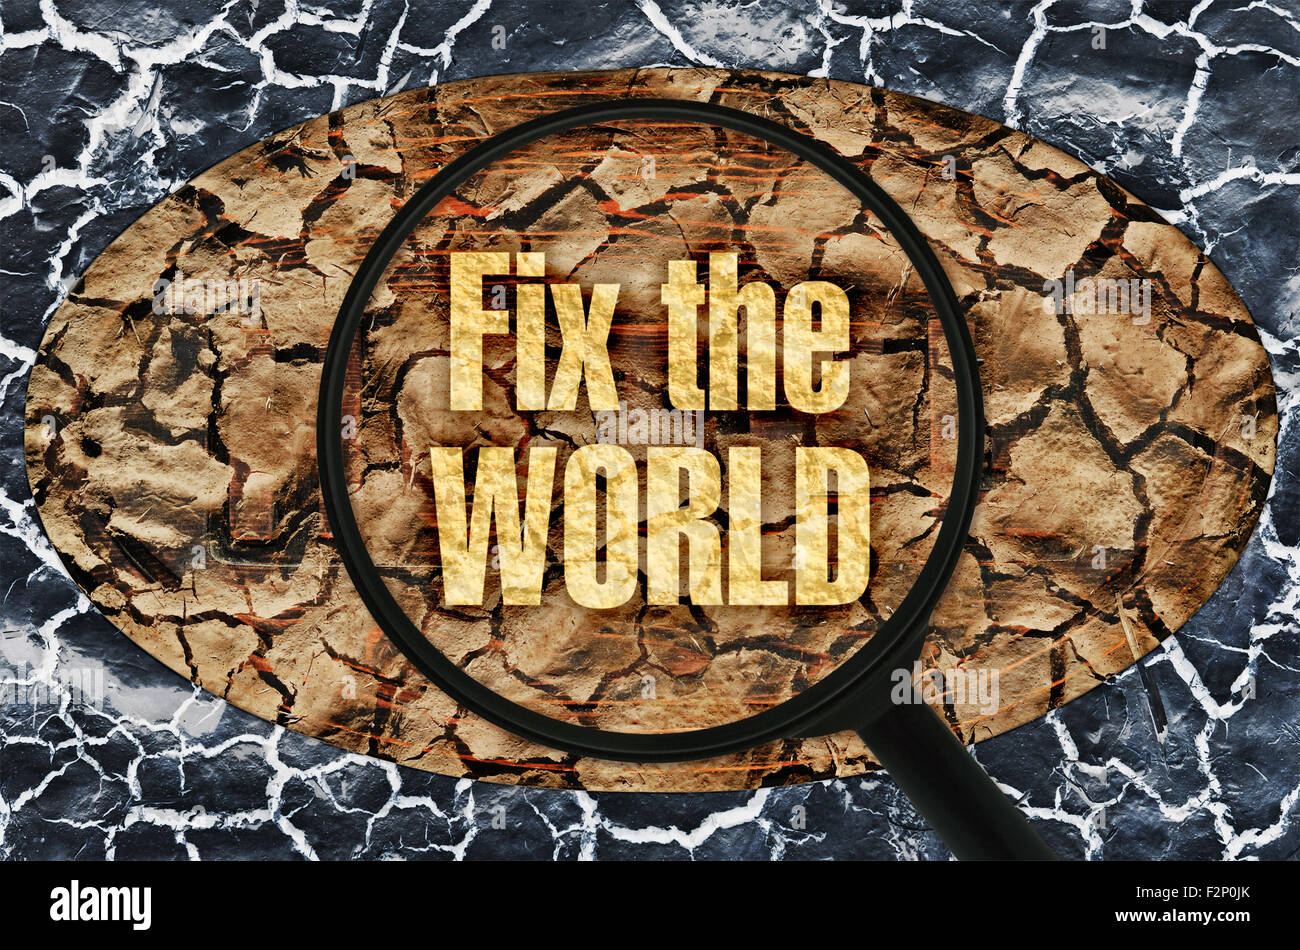 Text Fix the World under a magnifier on abstract background Stock Photo